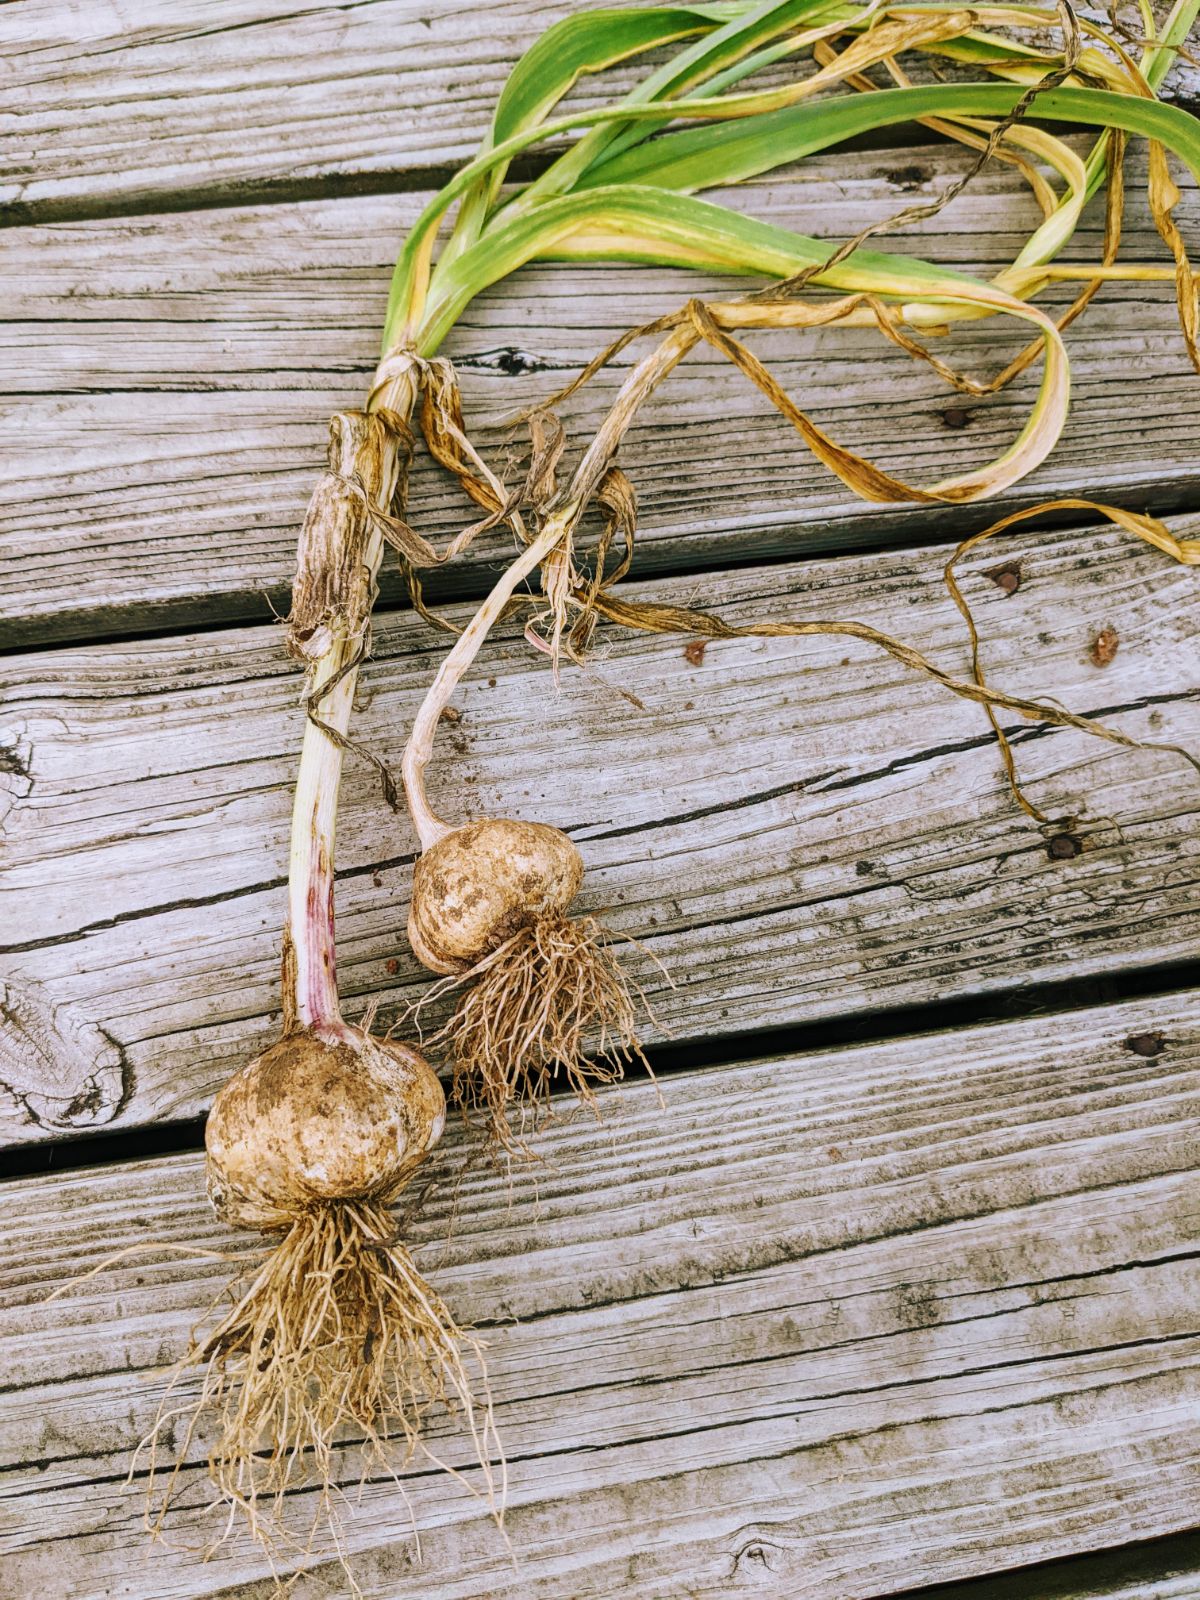 Harvested garlic on the wooden deck - two bulbs with greens and roots still attached